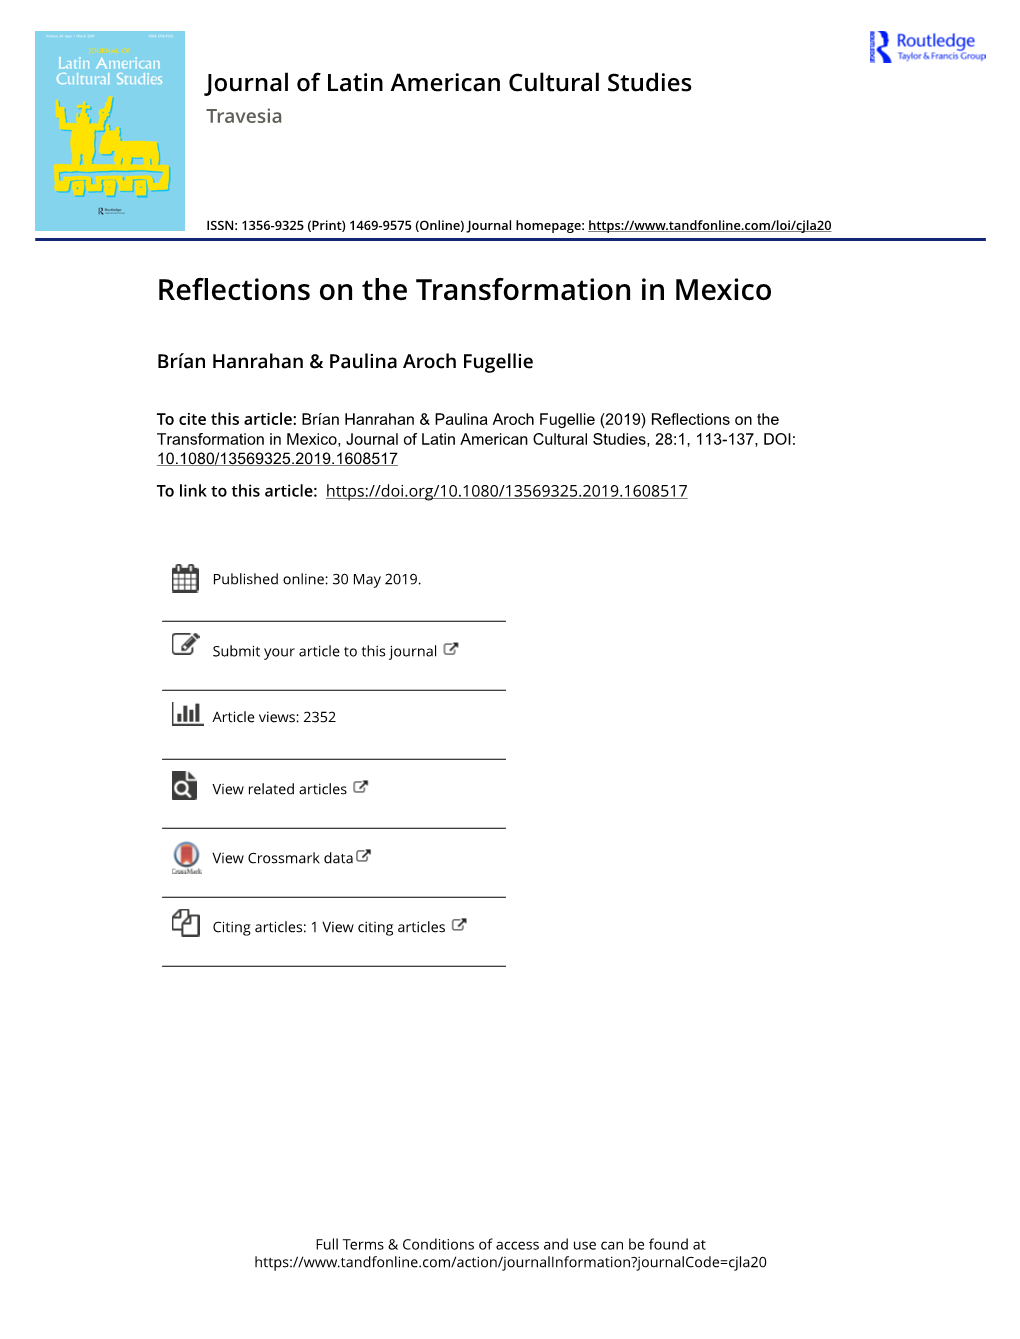 Reflections on the Transformation in Mexico